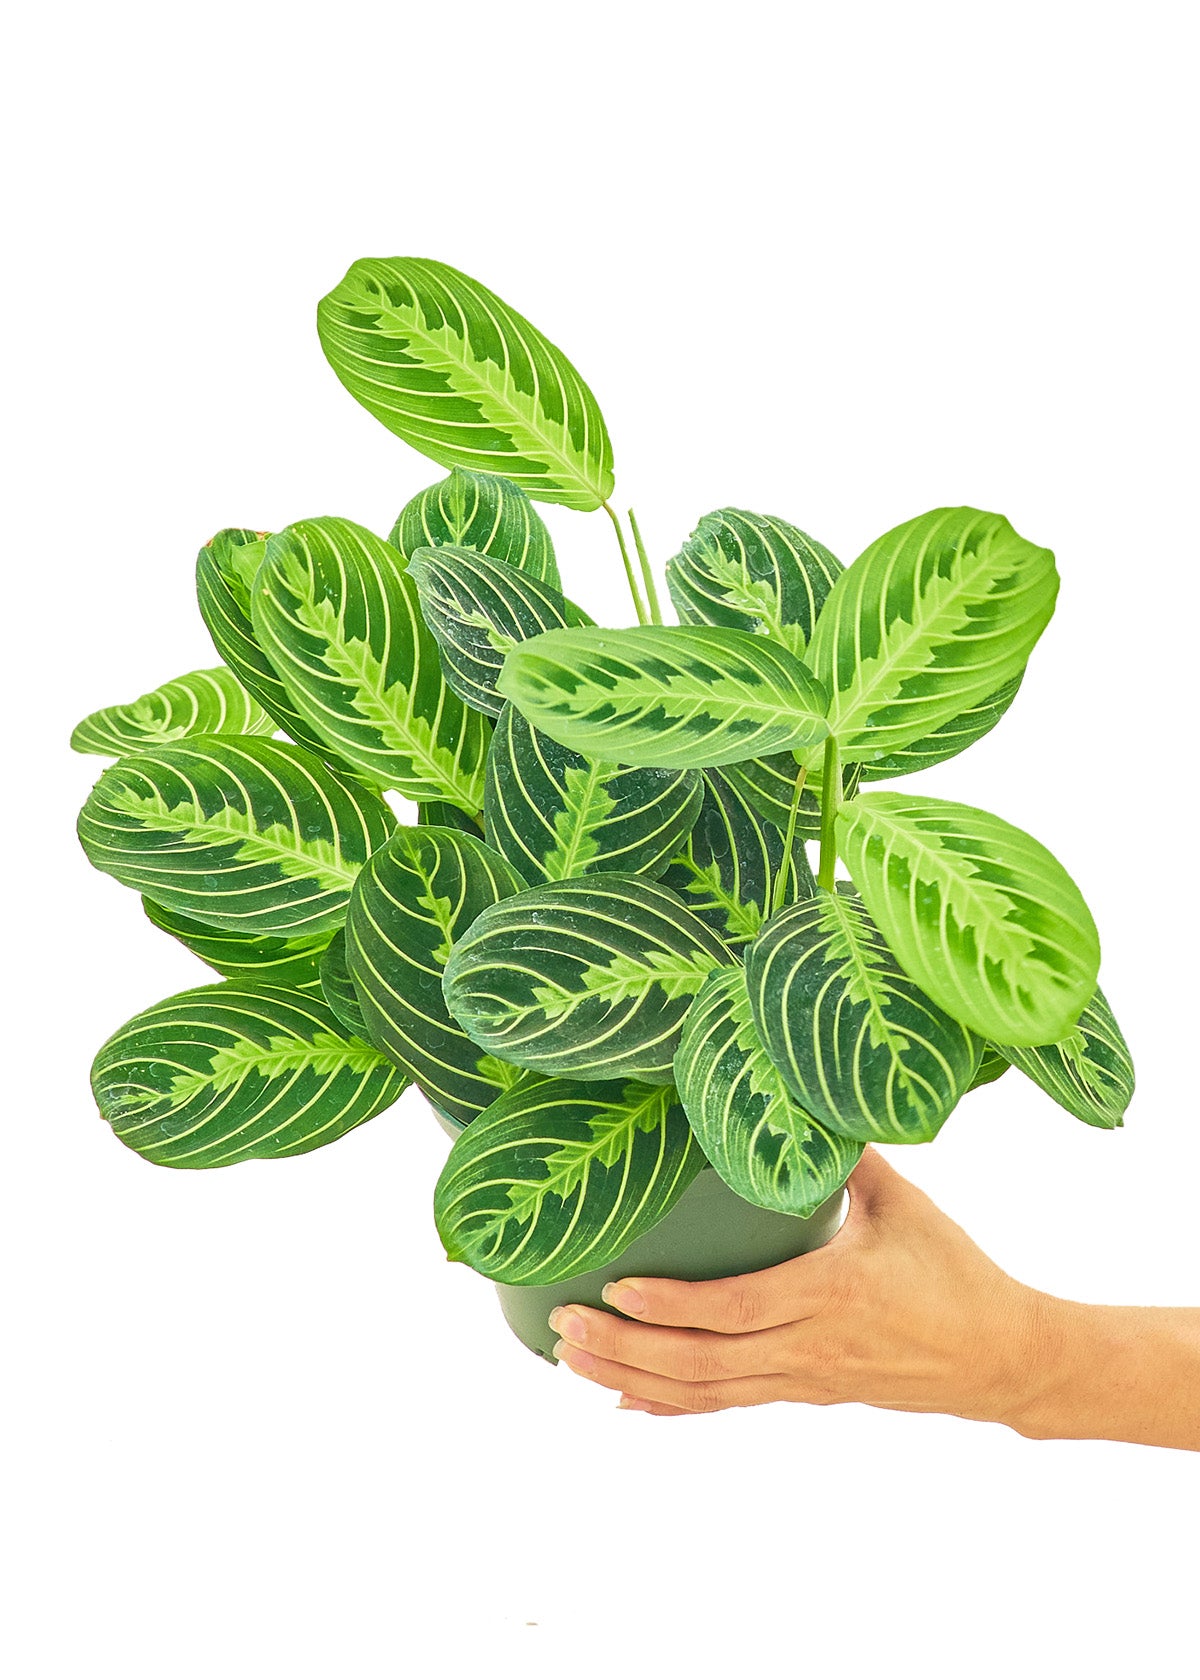 Medium sized Beauty Kim Prayer Plant in a growers pot with a white background with a hand holding the pot to show the top view